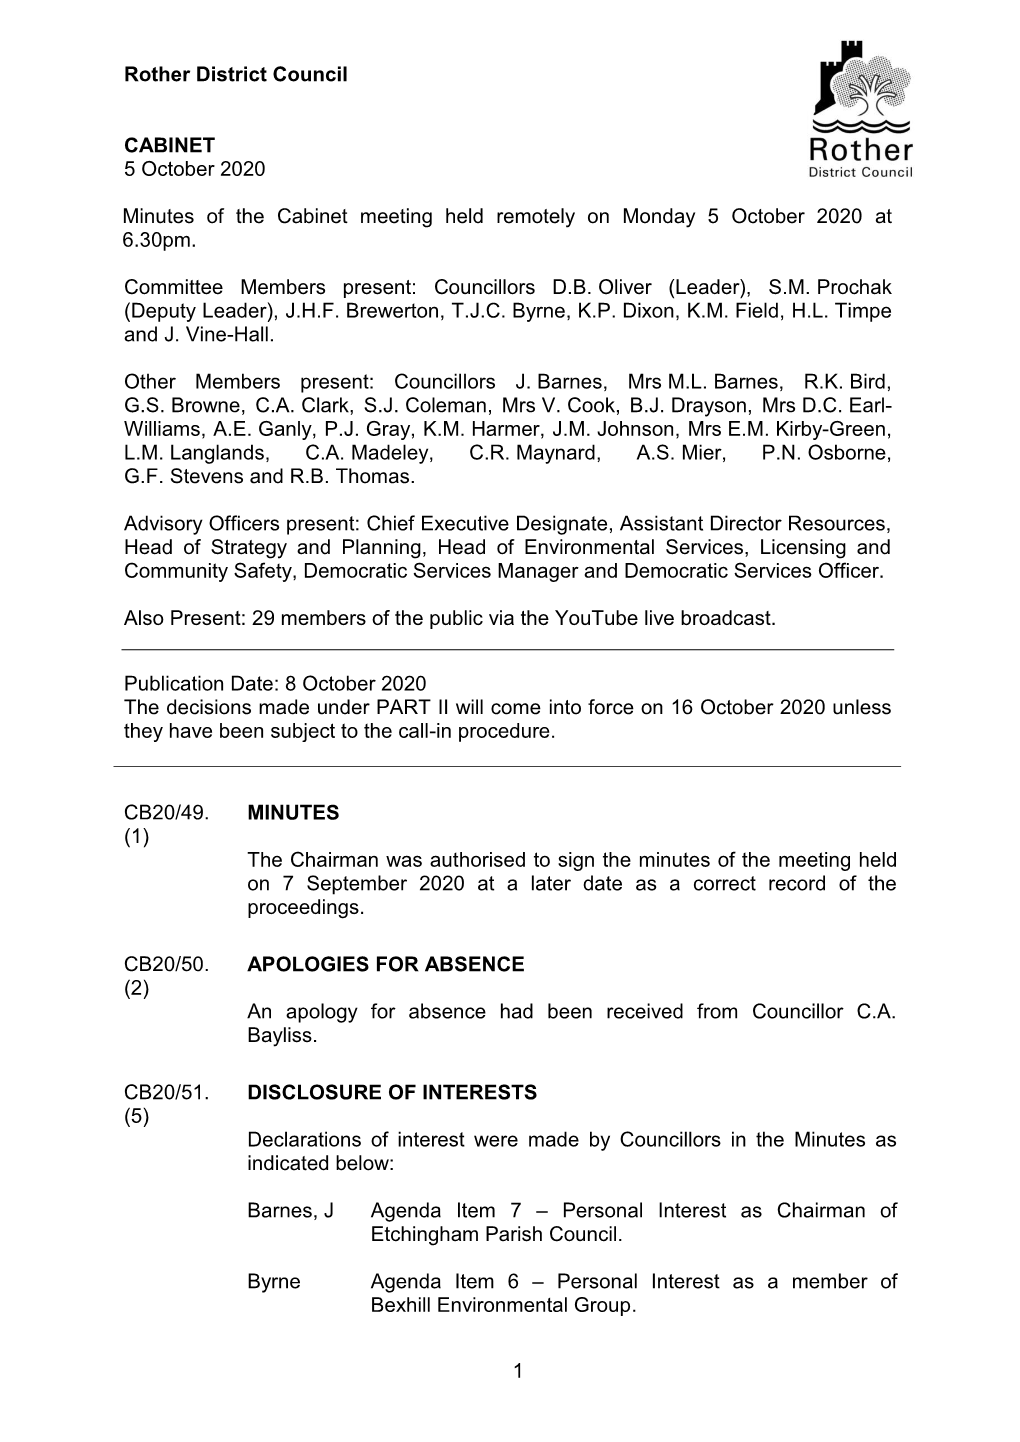 1 Rother District Council CABINET 5 October 2020 Minutes of the Cabinet Meeting Held Remotely on Monday 5 October 2020 at 6.30Pm